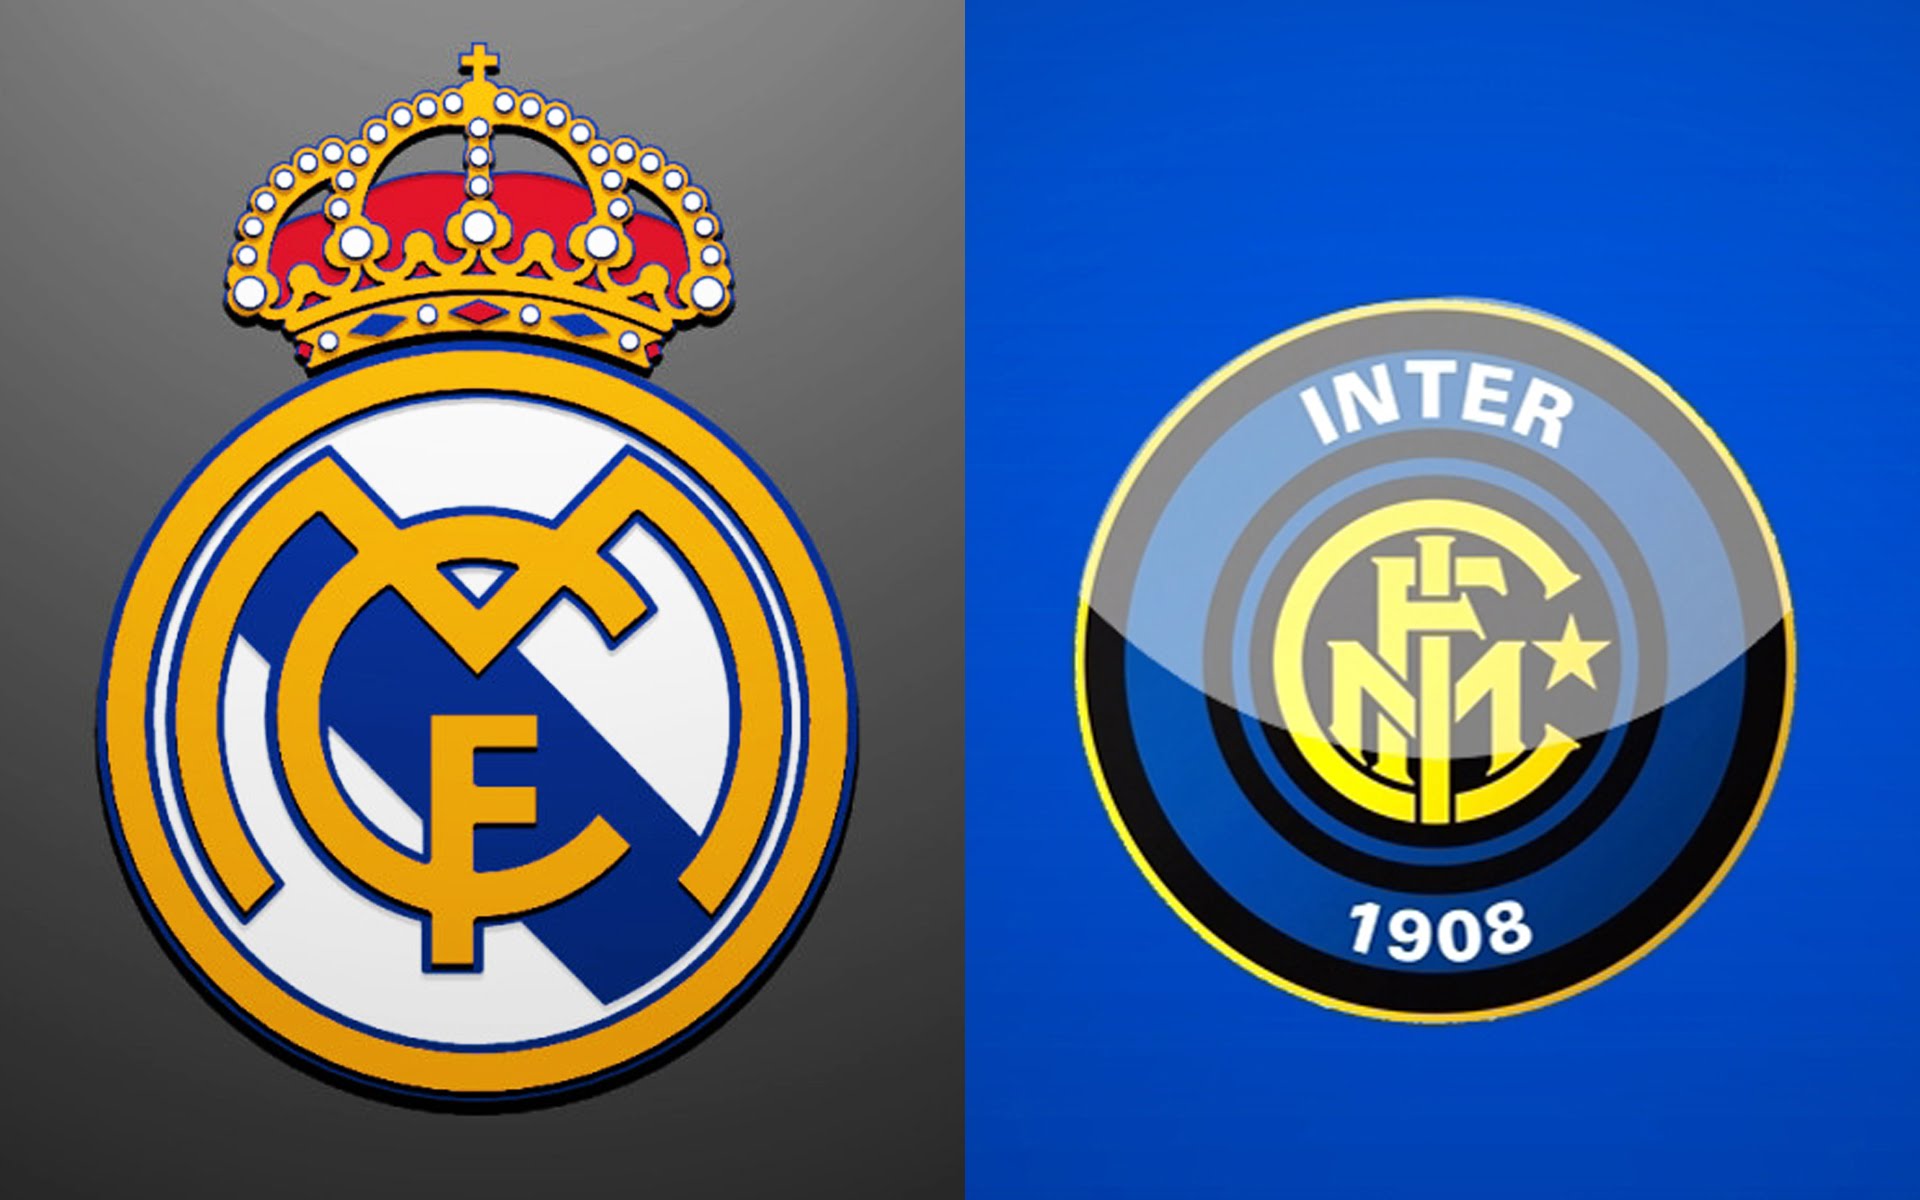 CdS: Probable line ups ahead of Inter vs Real Madrid?